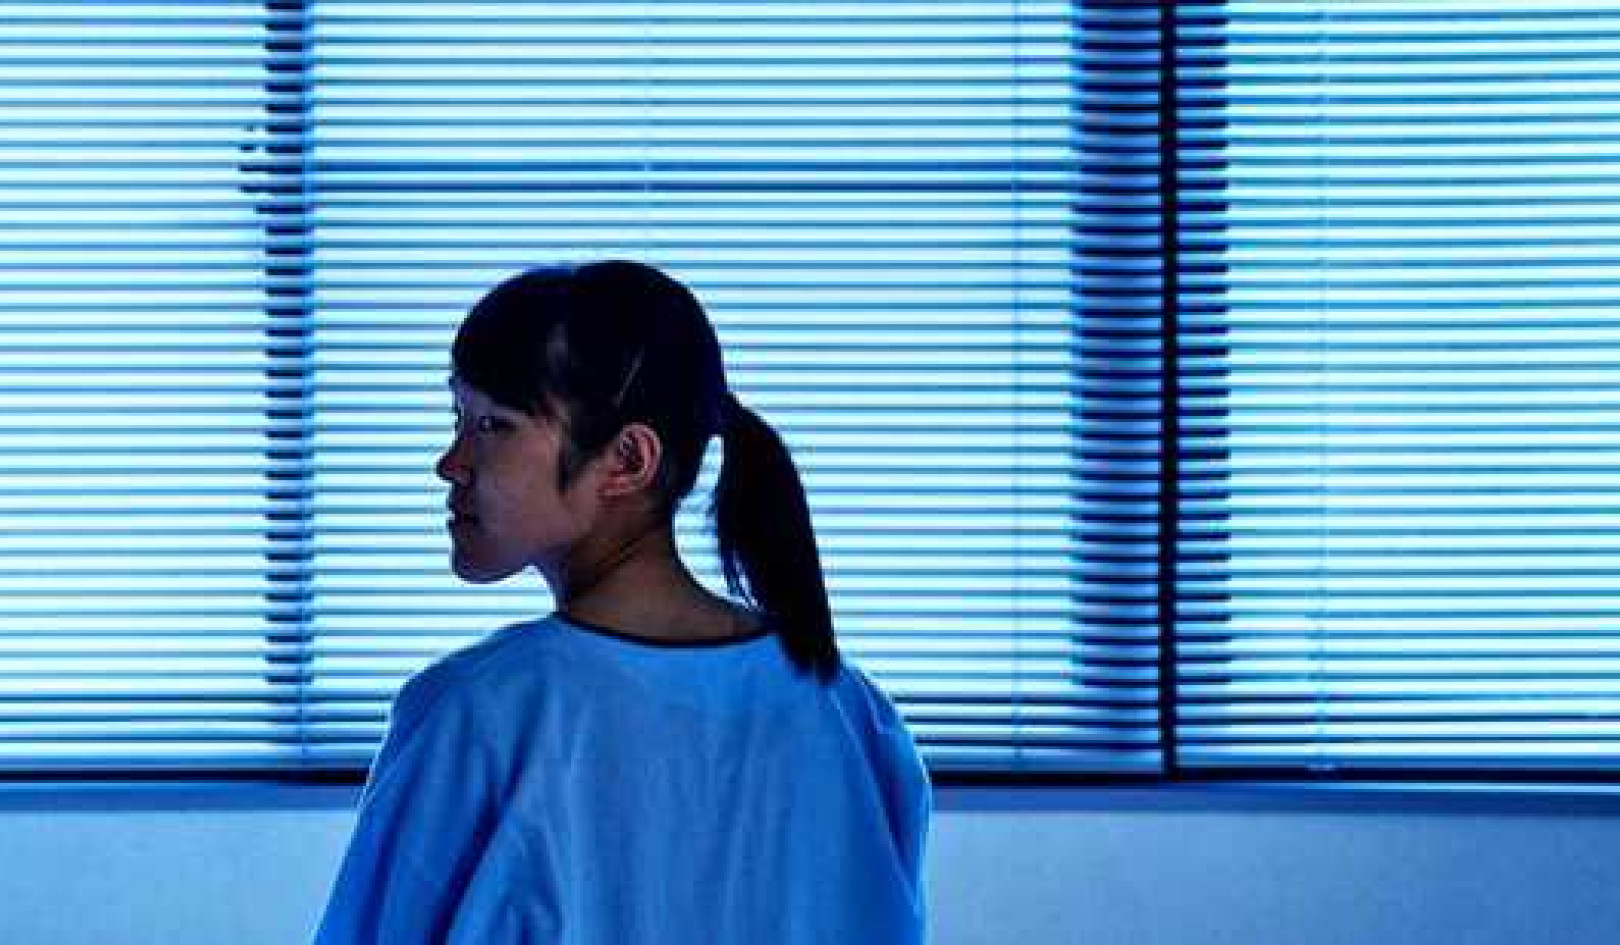 Eating disorder hospitalizations spiked during pandemic